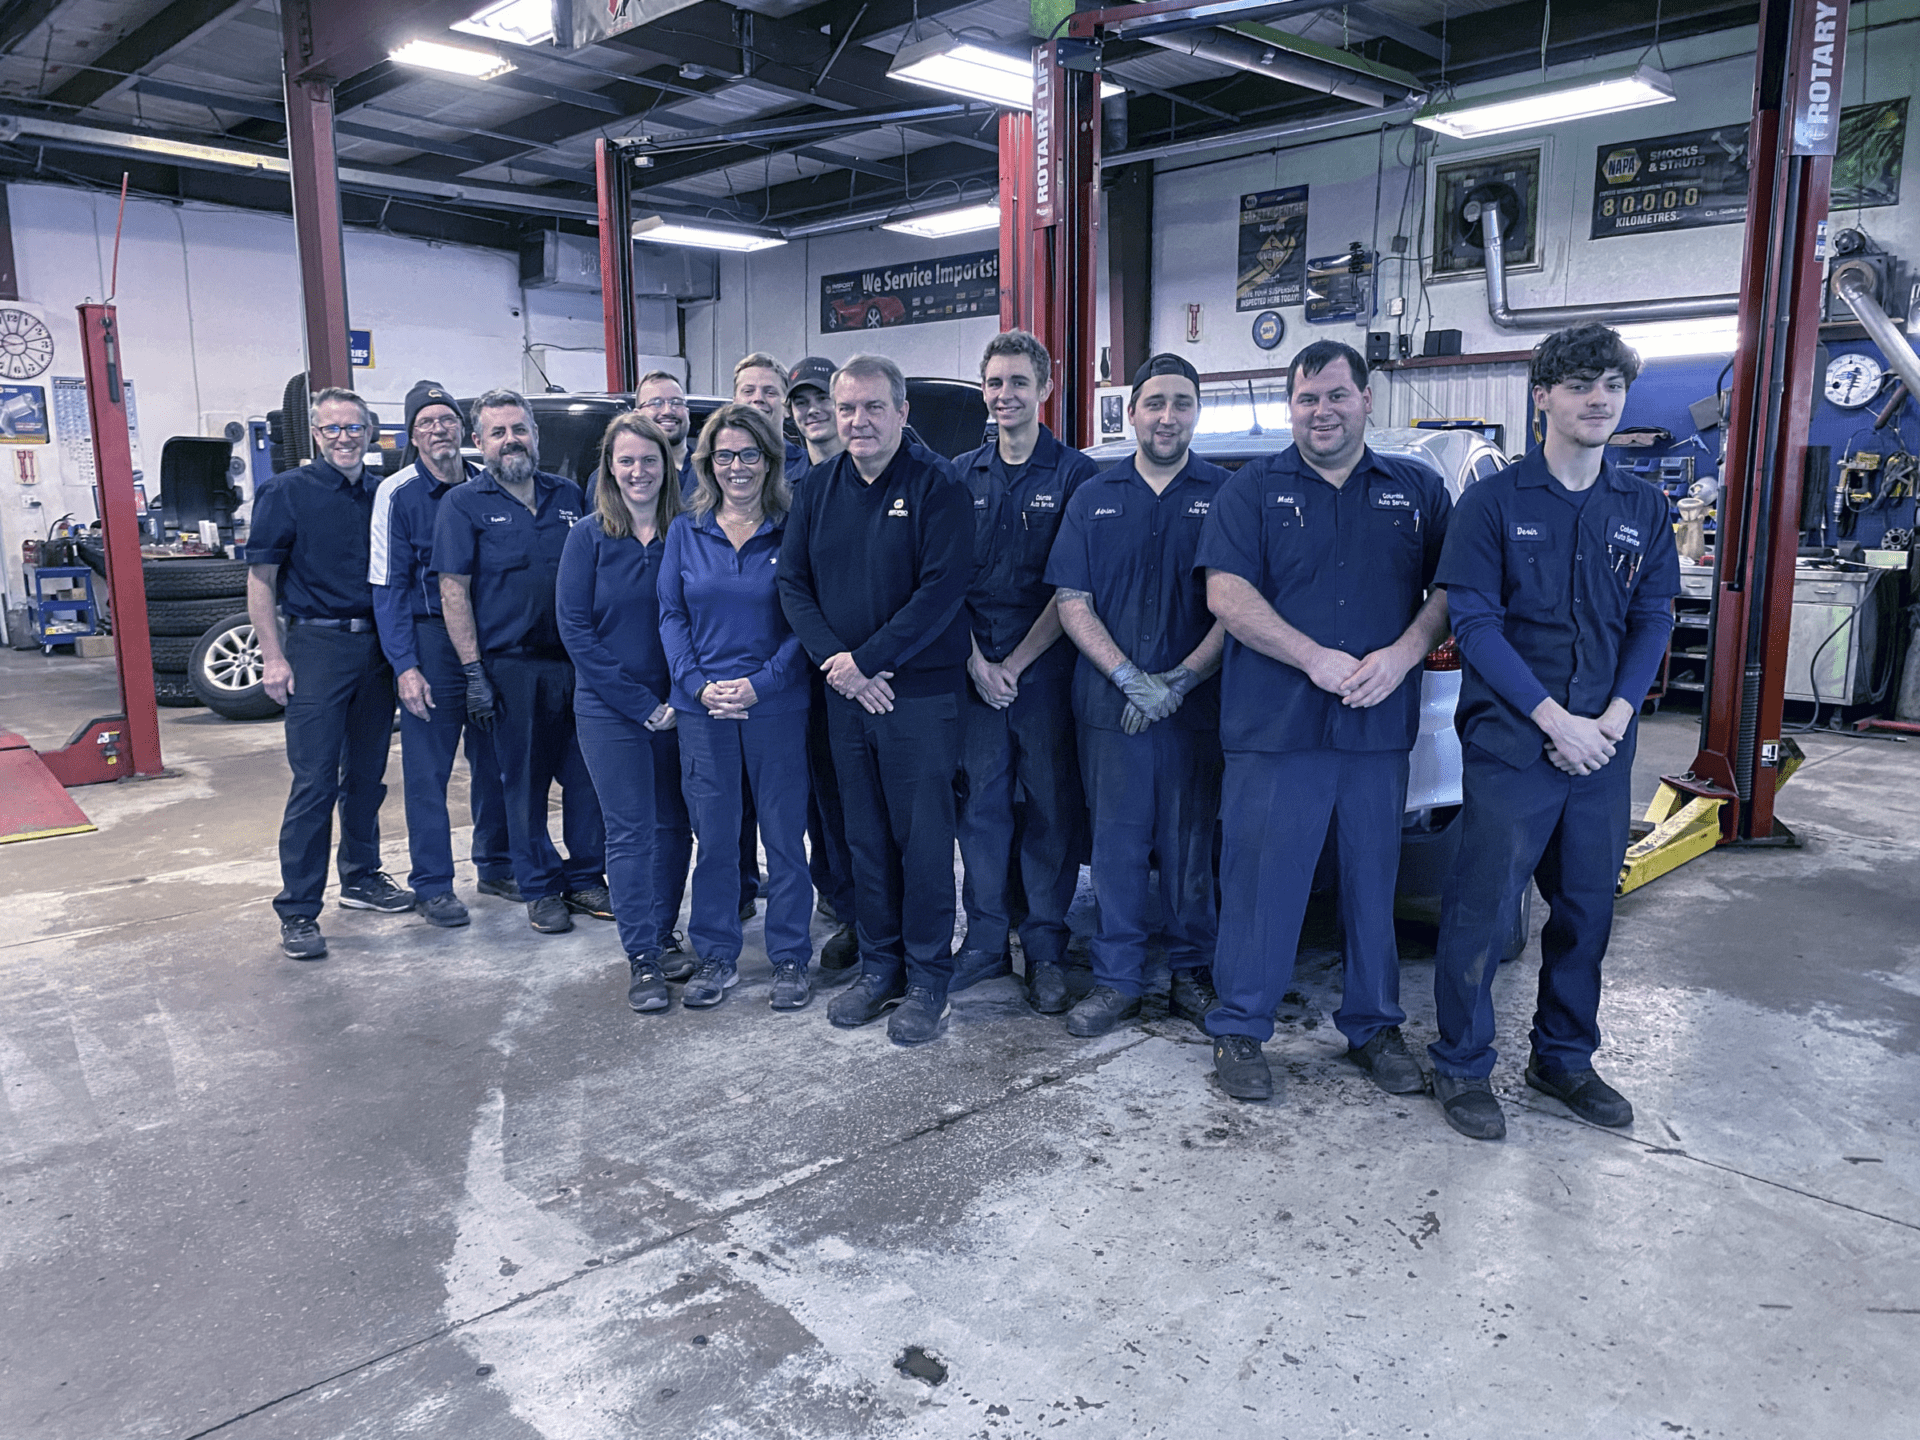 A group of people pose in a car repair workshop, wearing uniforms. They stand in front of vehicles and garage equipment, smiling at the camera.